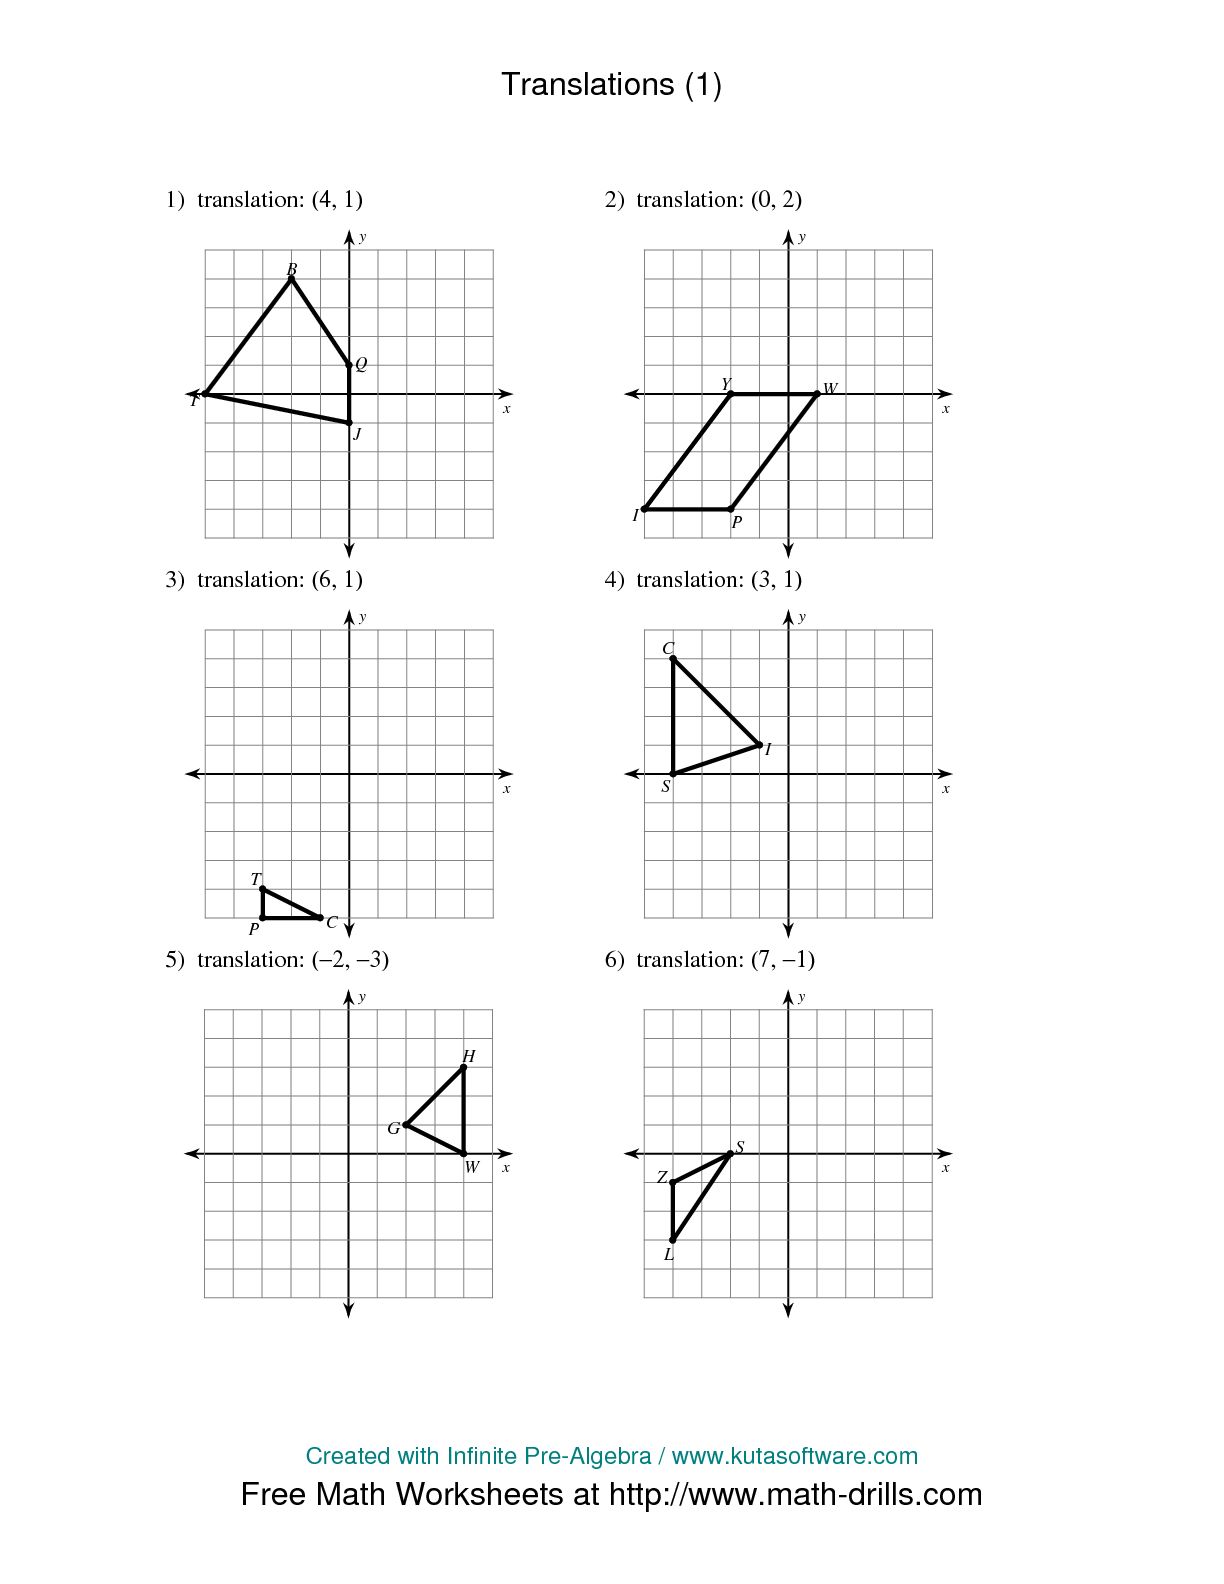 reflections-on-coordinate-plane-worksheet